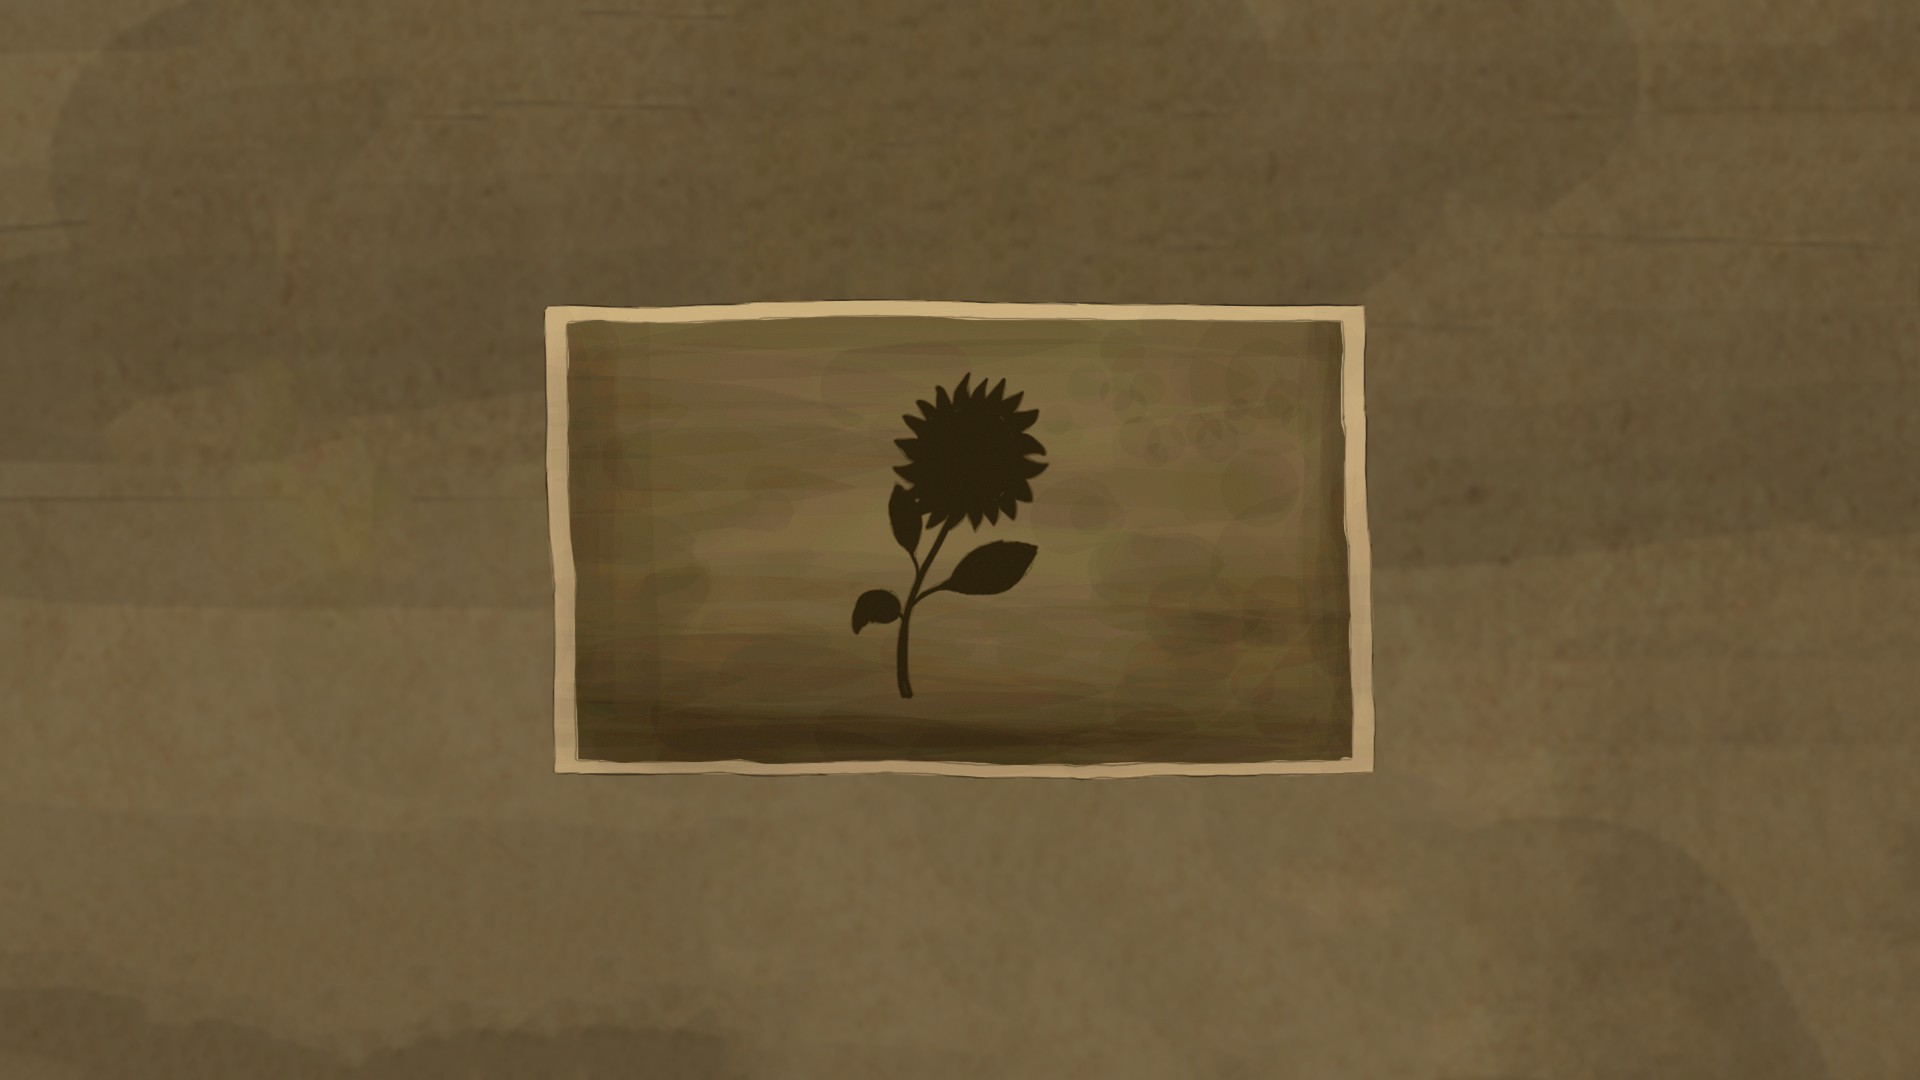 Icon for Found a sunflower